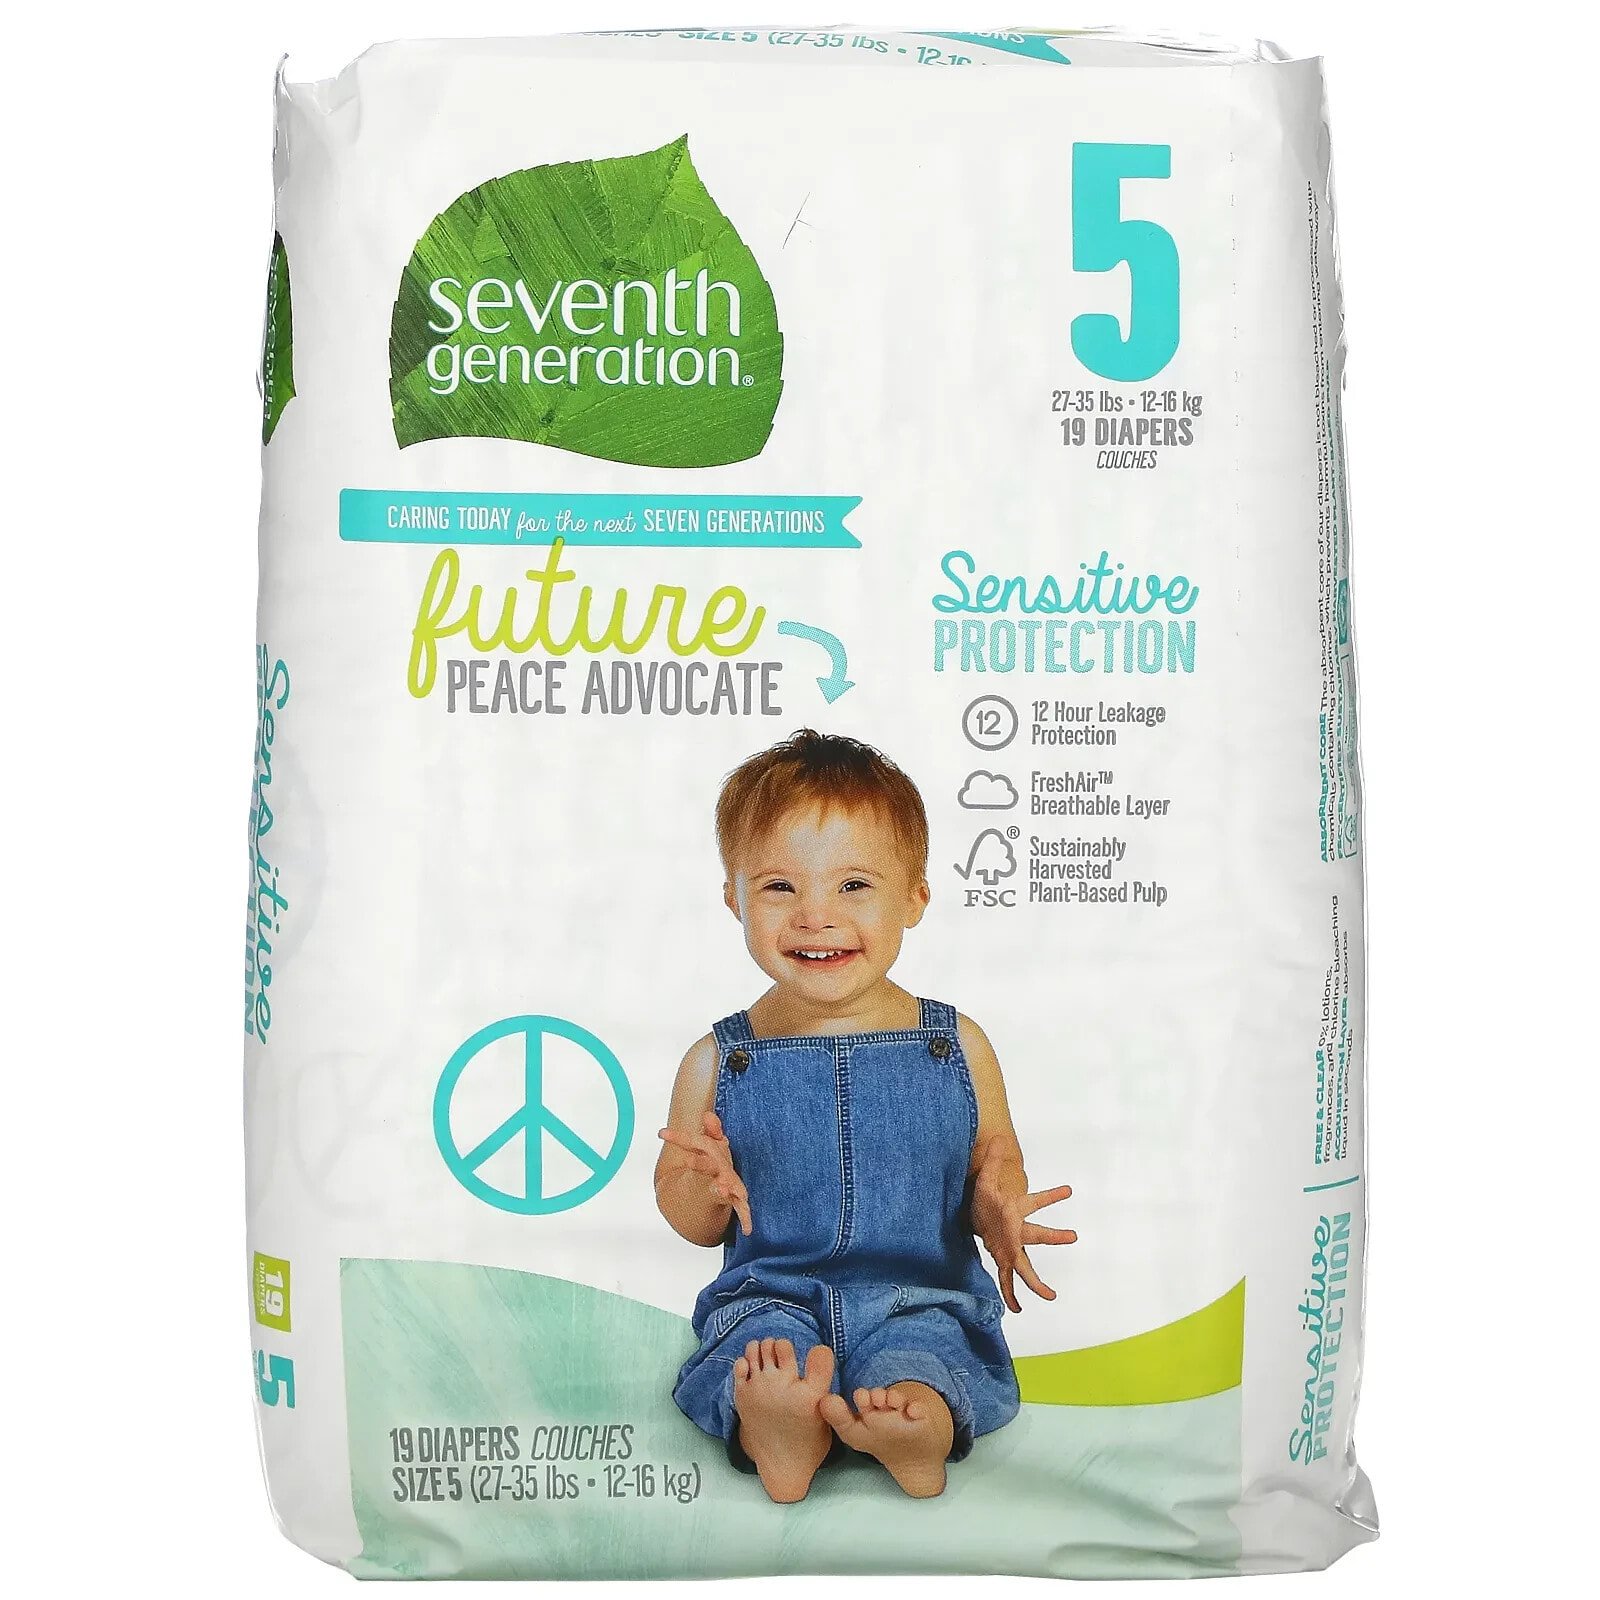 Dodot Stages Size 3 62 Units Diapers